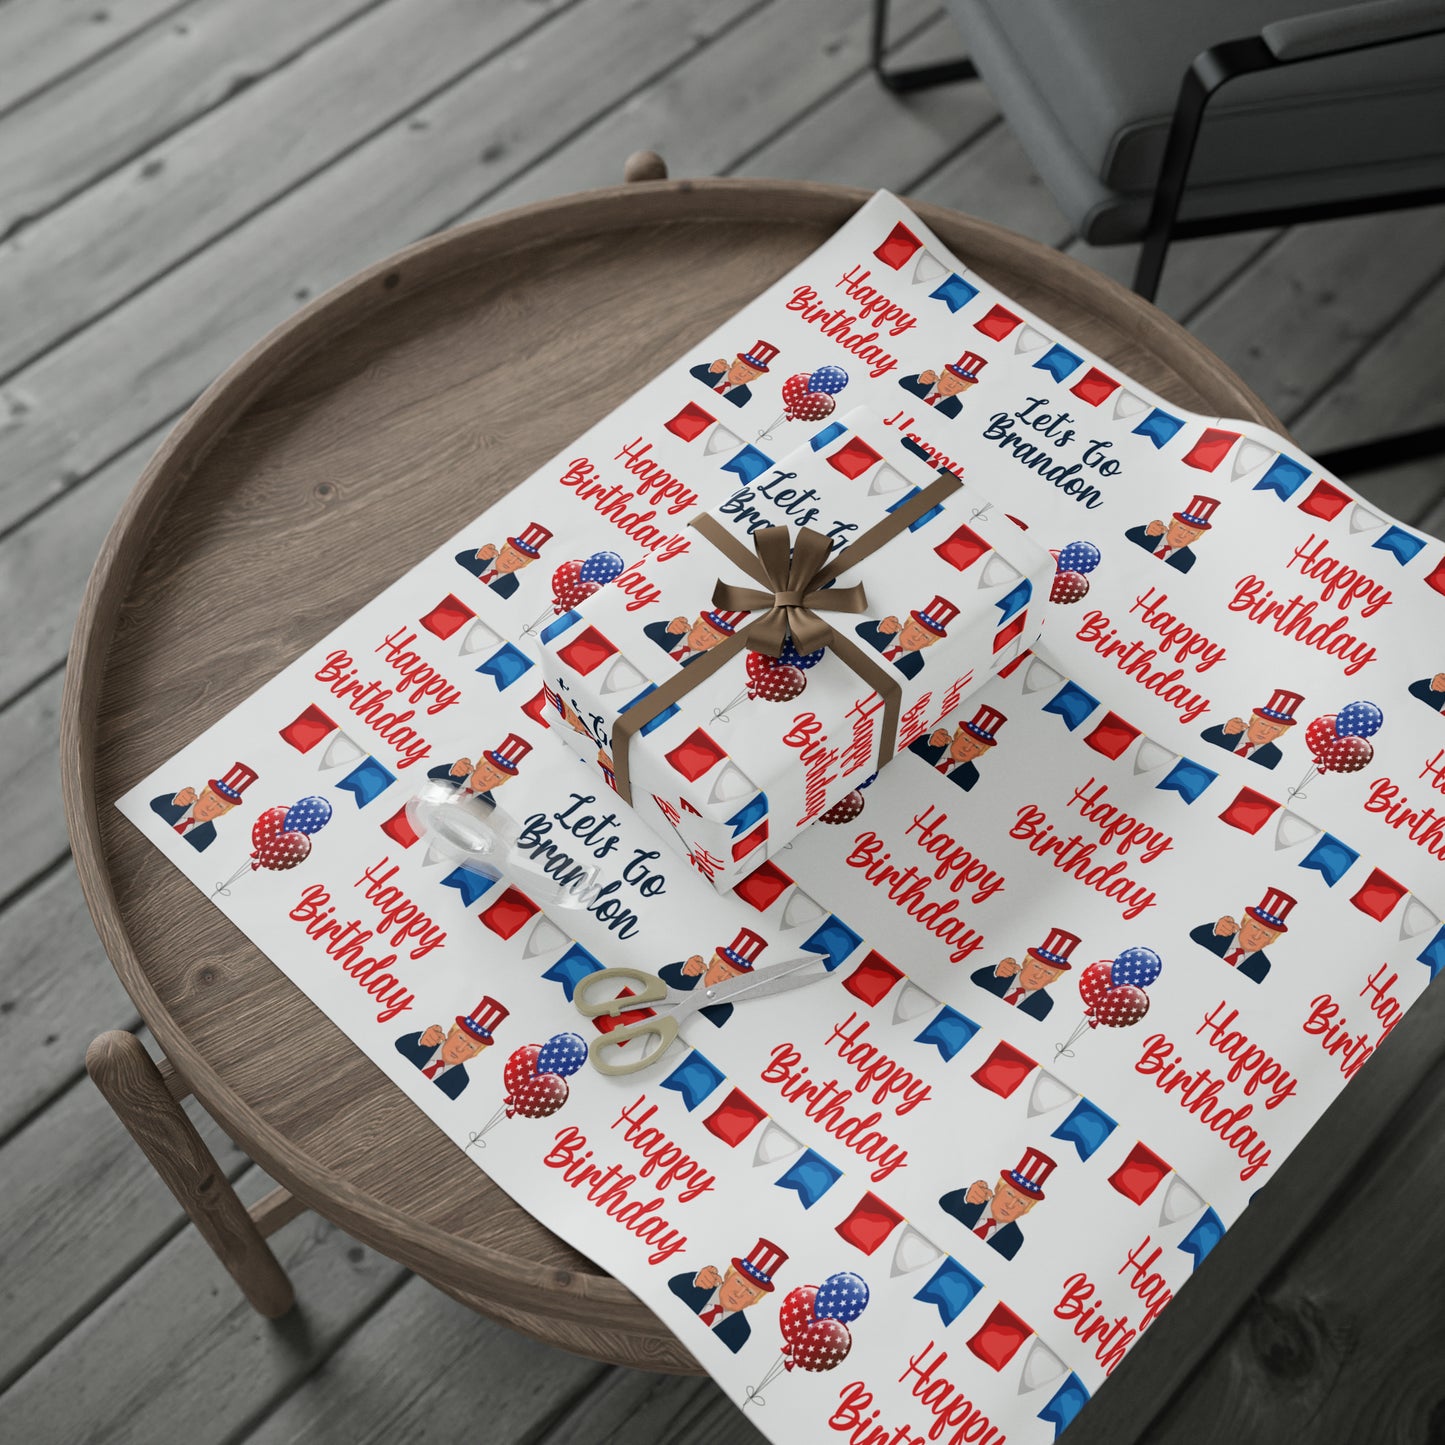 Top Trump Birthday Wrapping Paper for Gifts - Trump Maga Gift Let's Go Brandon Wrapping Paper